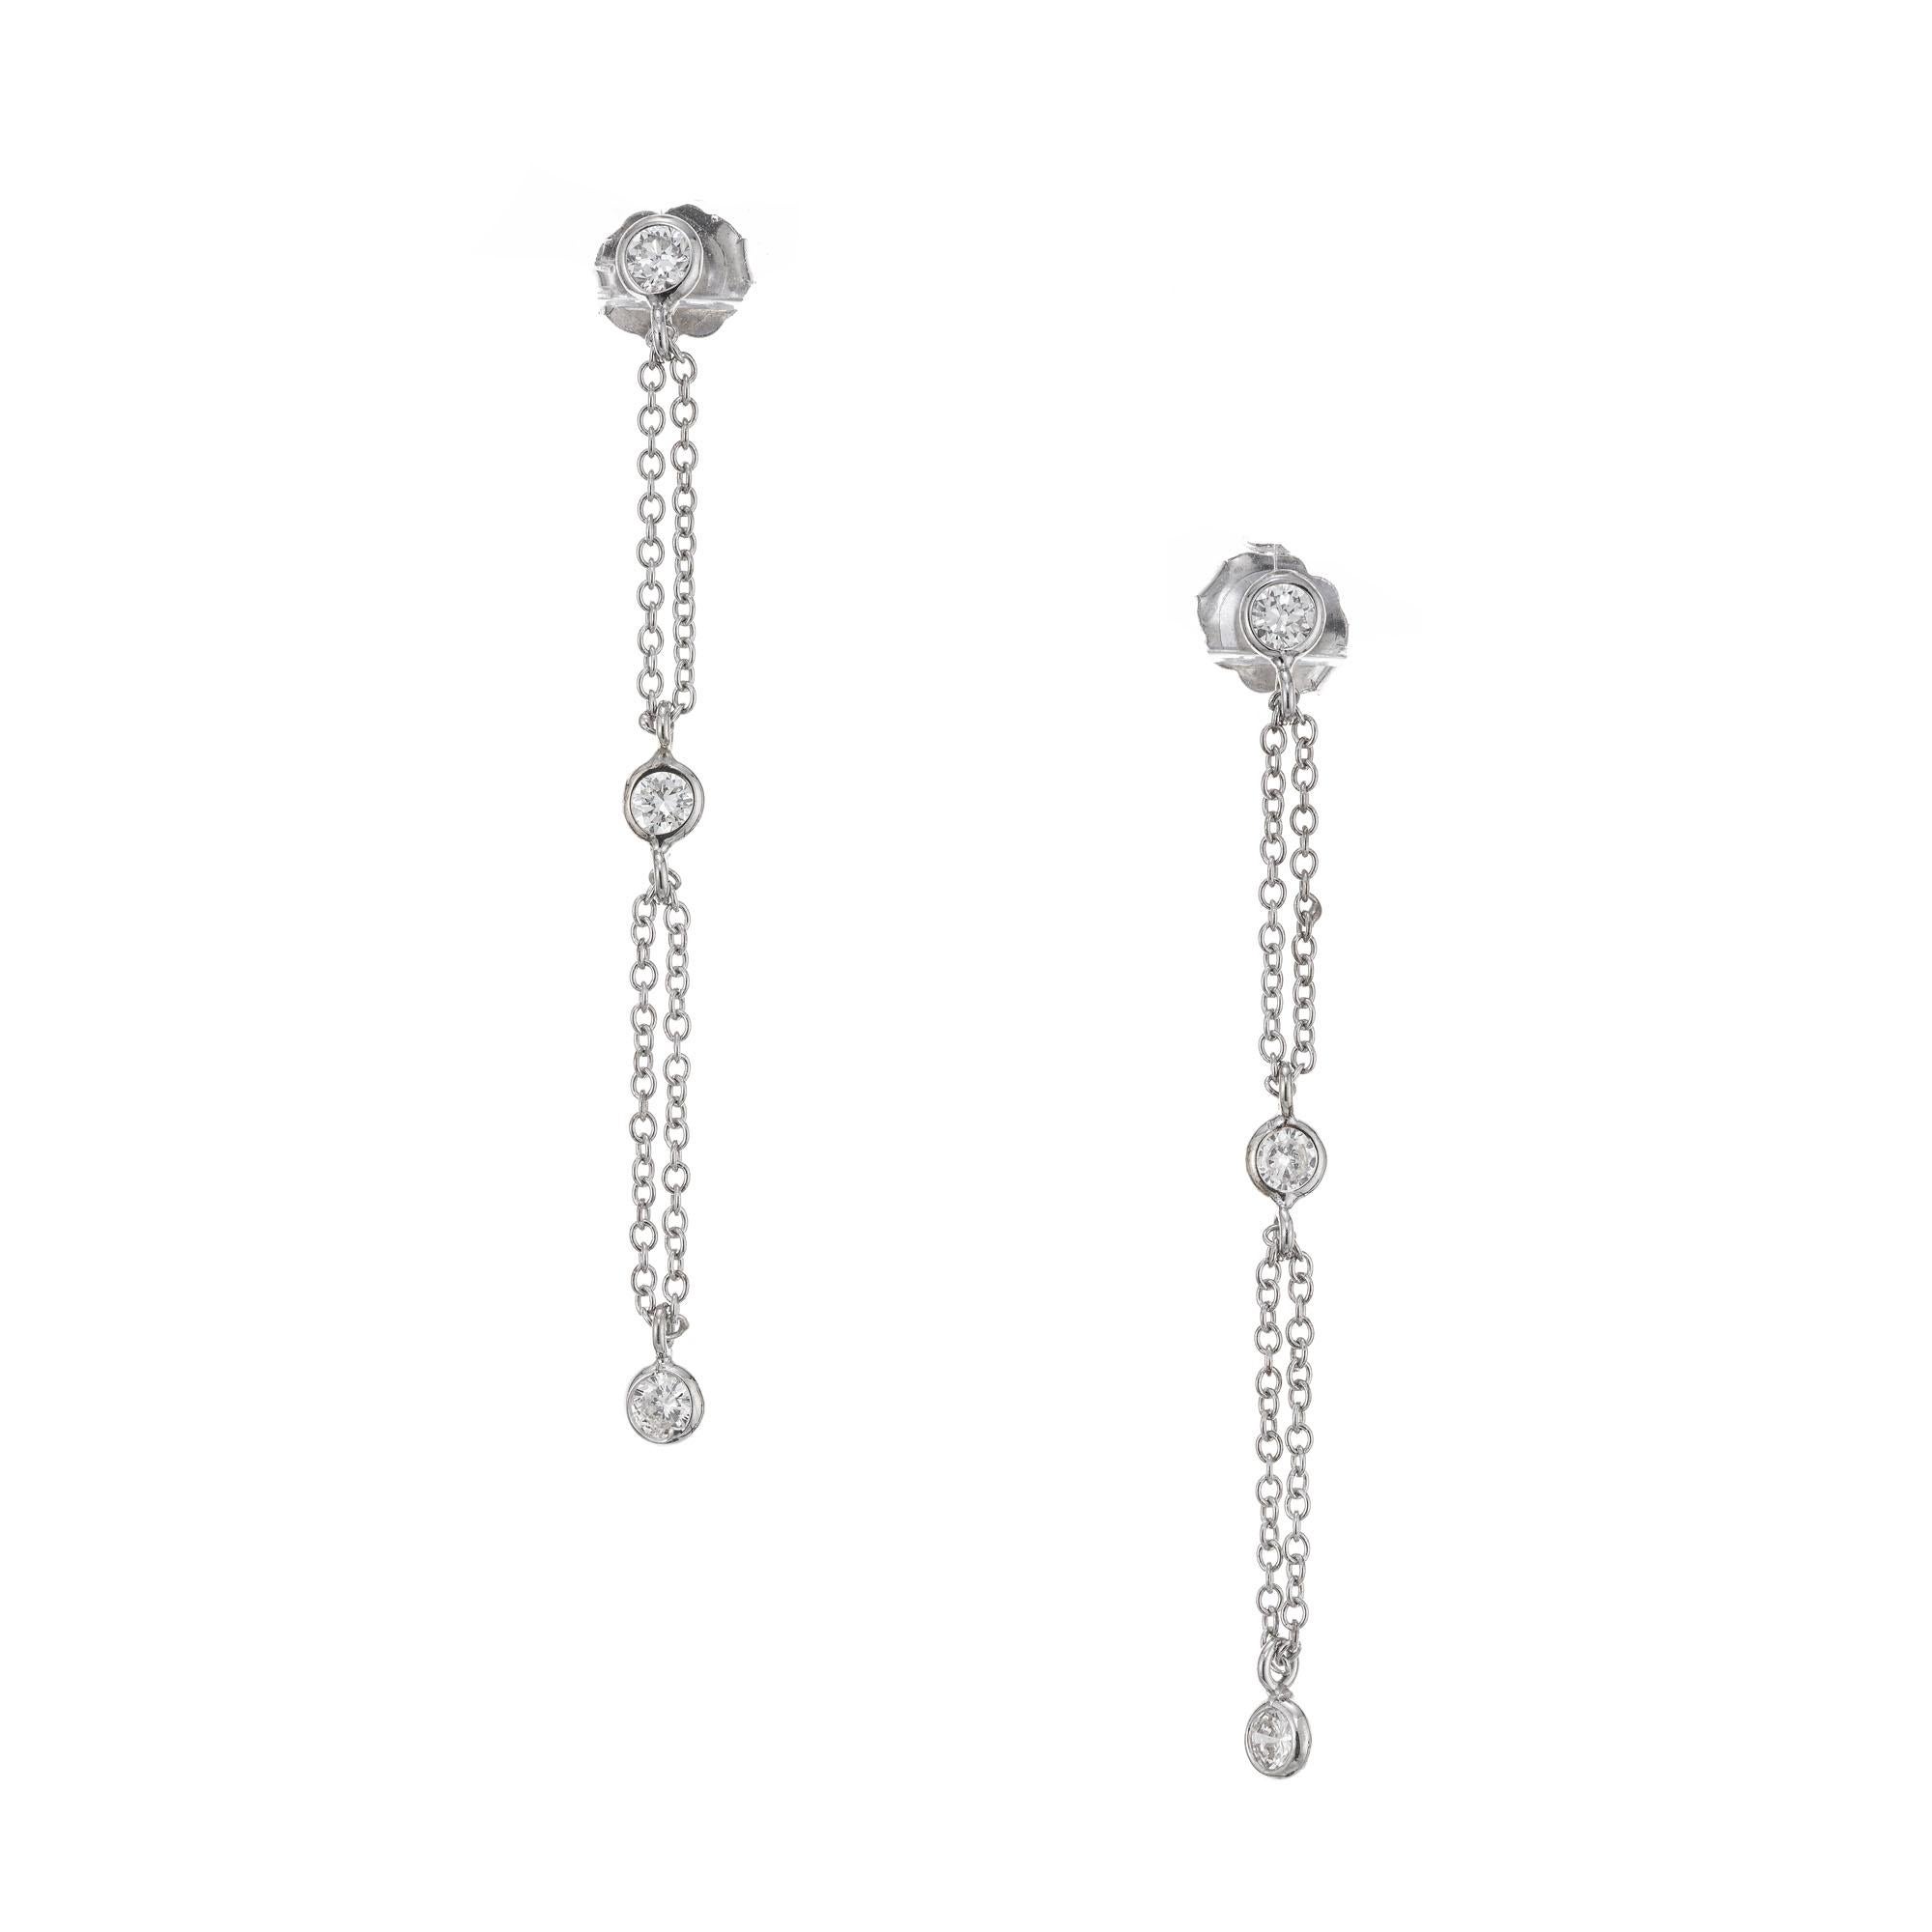 Peter Suchy diamond by the yard style dangle earrings. 6 Bezel set diamonds connected by a continuous loop of double chain that floats freely through the jump ring on the diamond. Bezels are 3.3mm and the chain is 1mm.

6 round full cut diamonds,